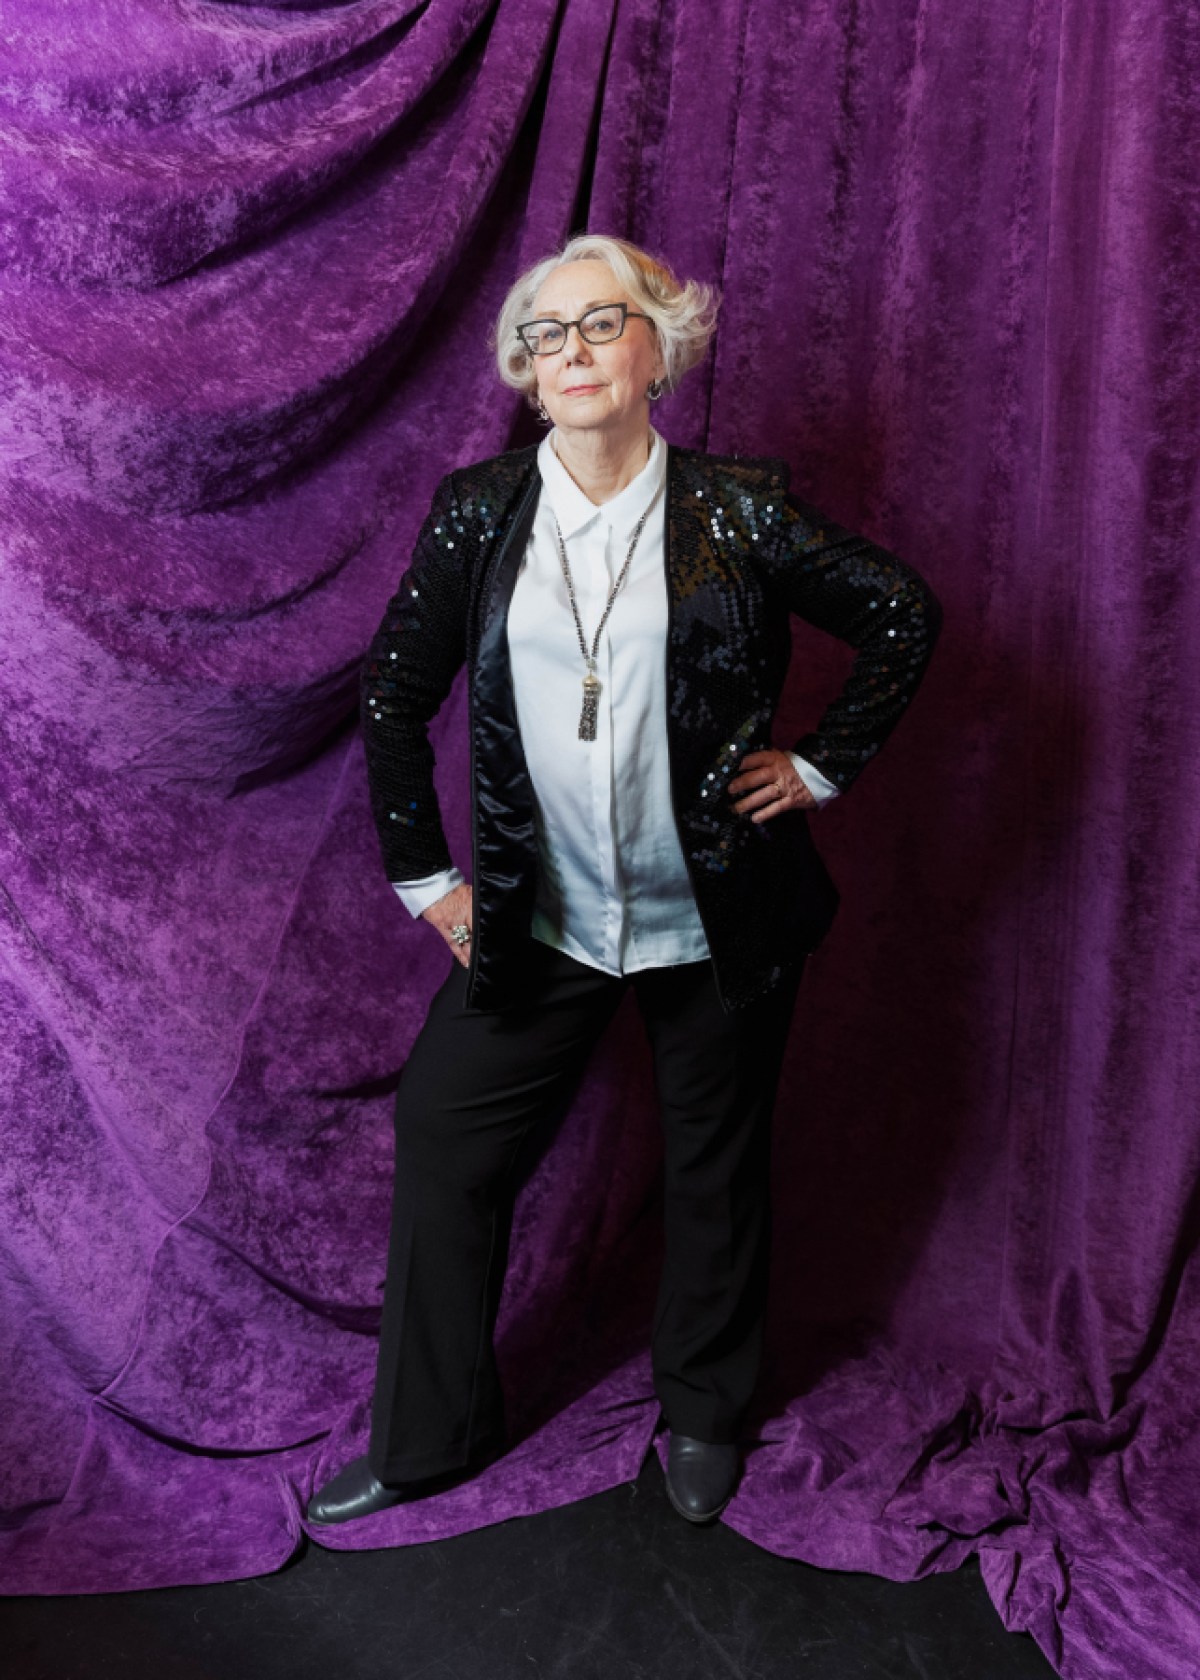 Mink Stole poses in front of a purple backdrop in a sparkly black suit